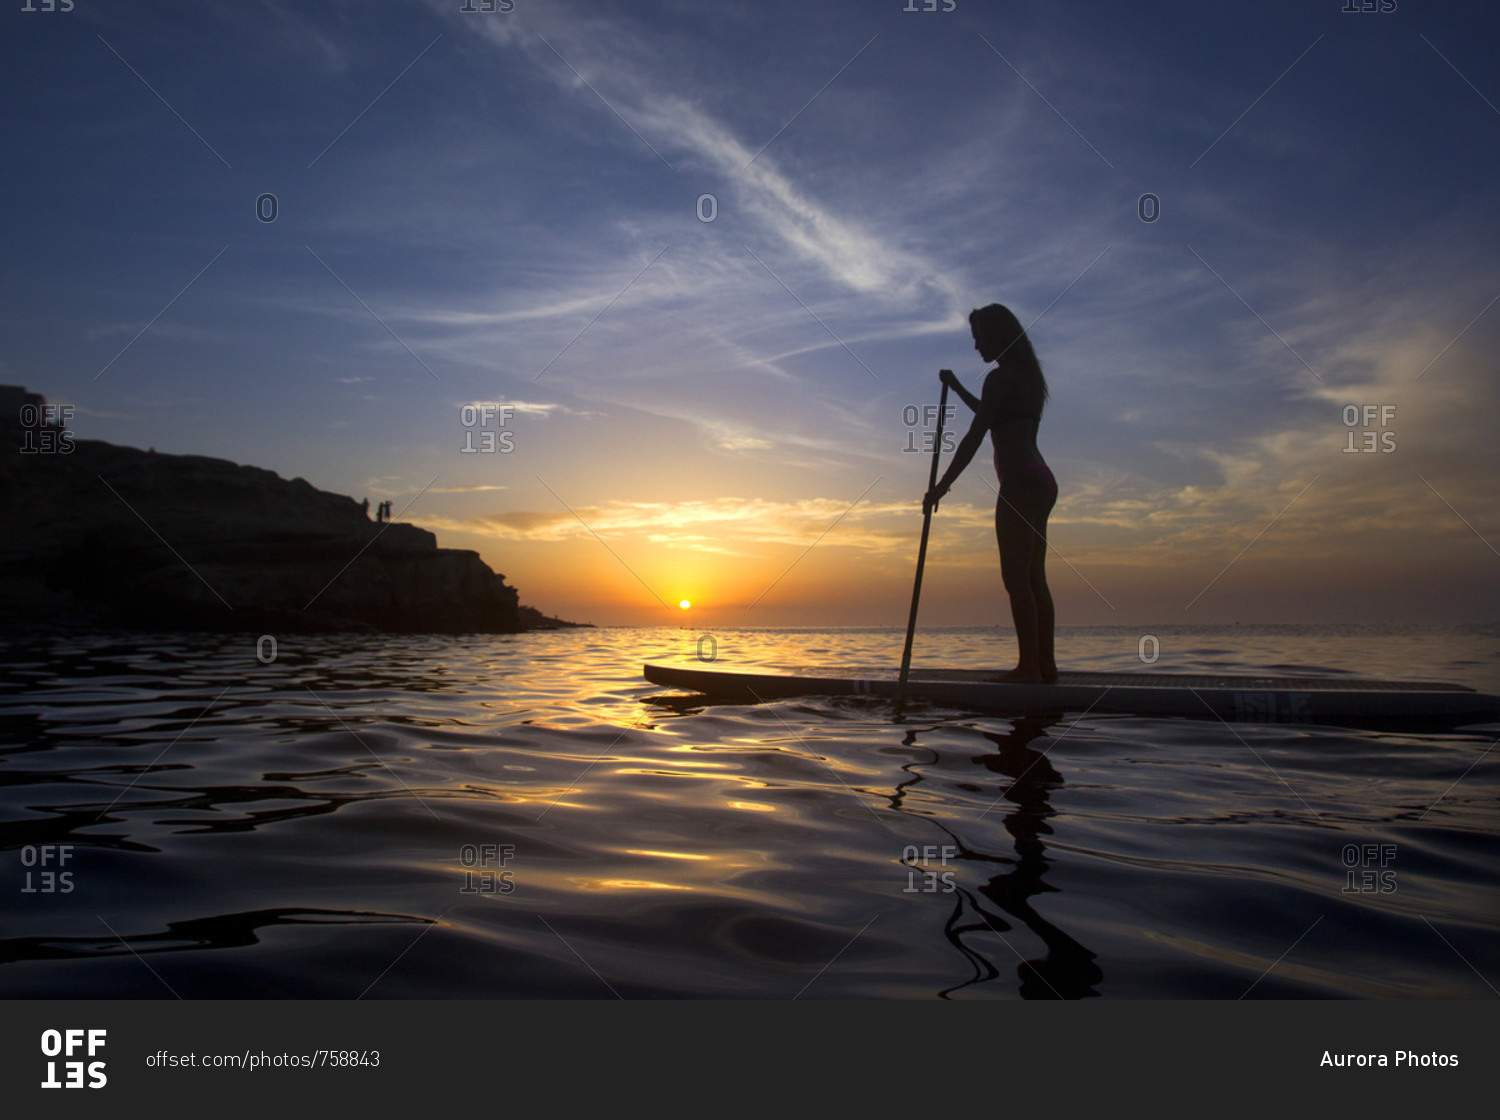 Side view of woman?paddle boarding?ion Pacific Ocean?at sunset, La?Jolla, San Diego, California, USA